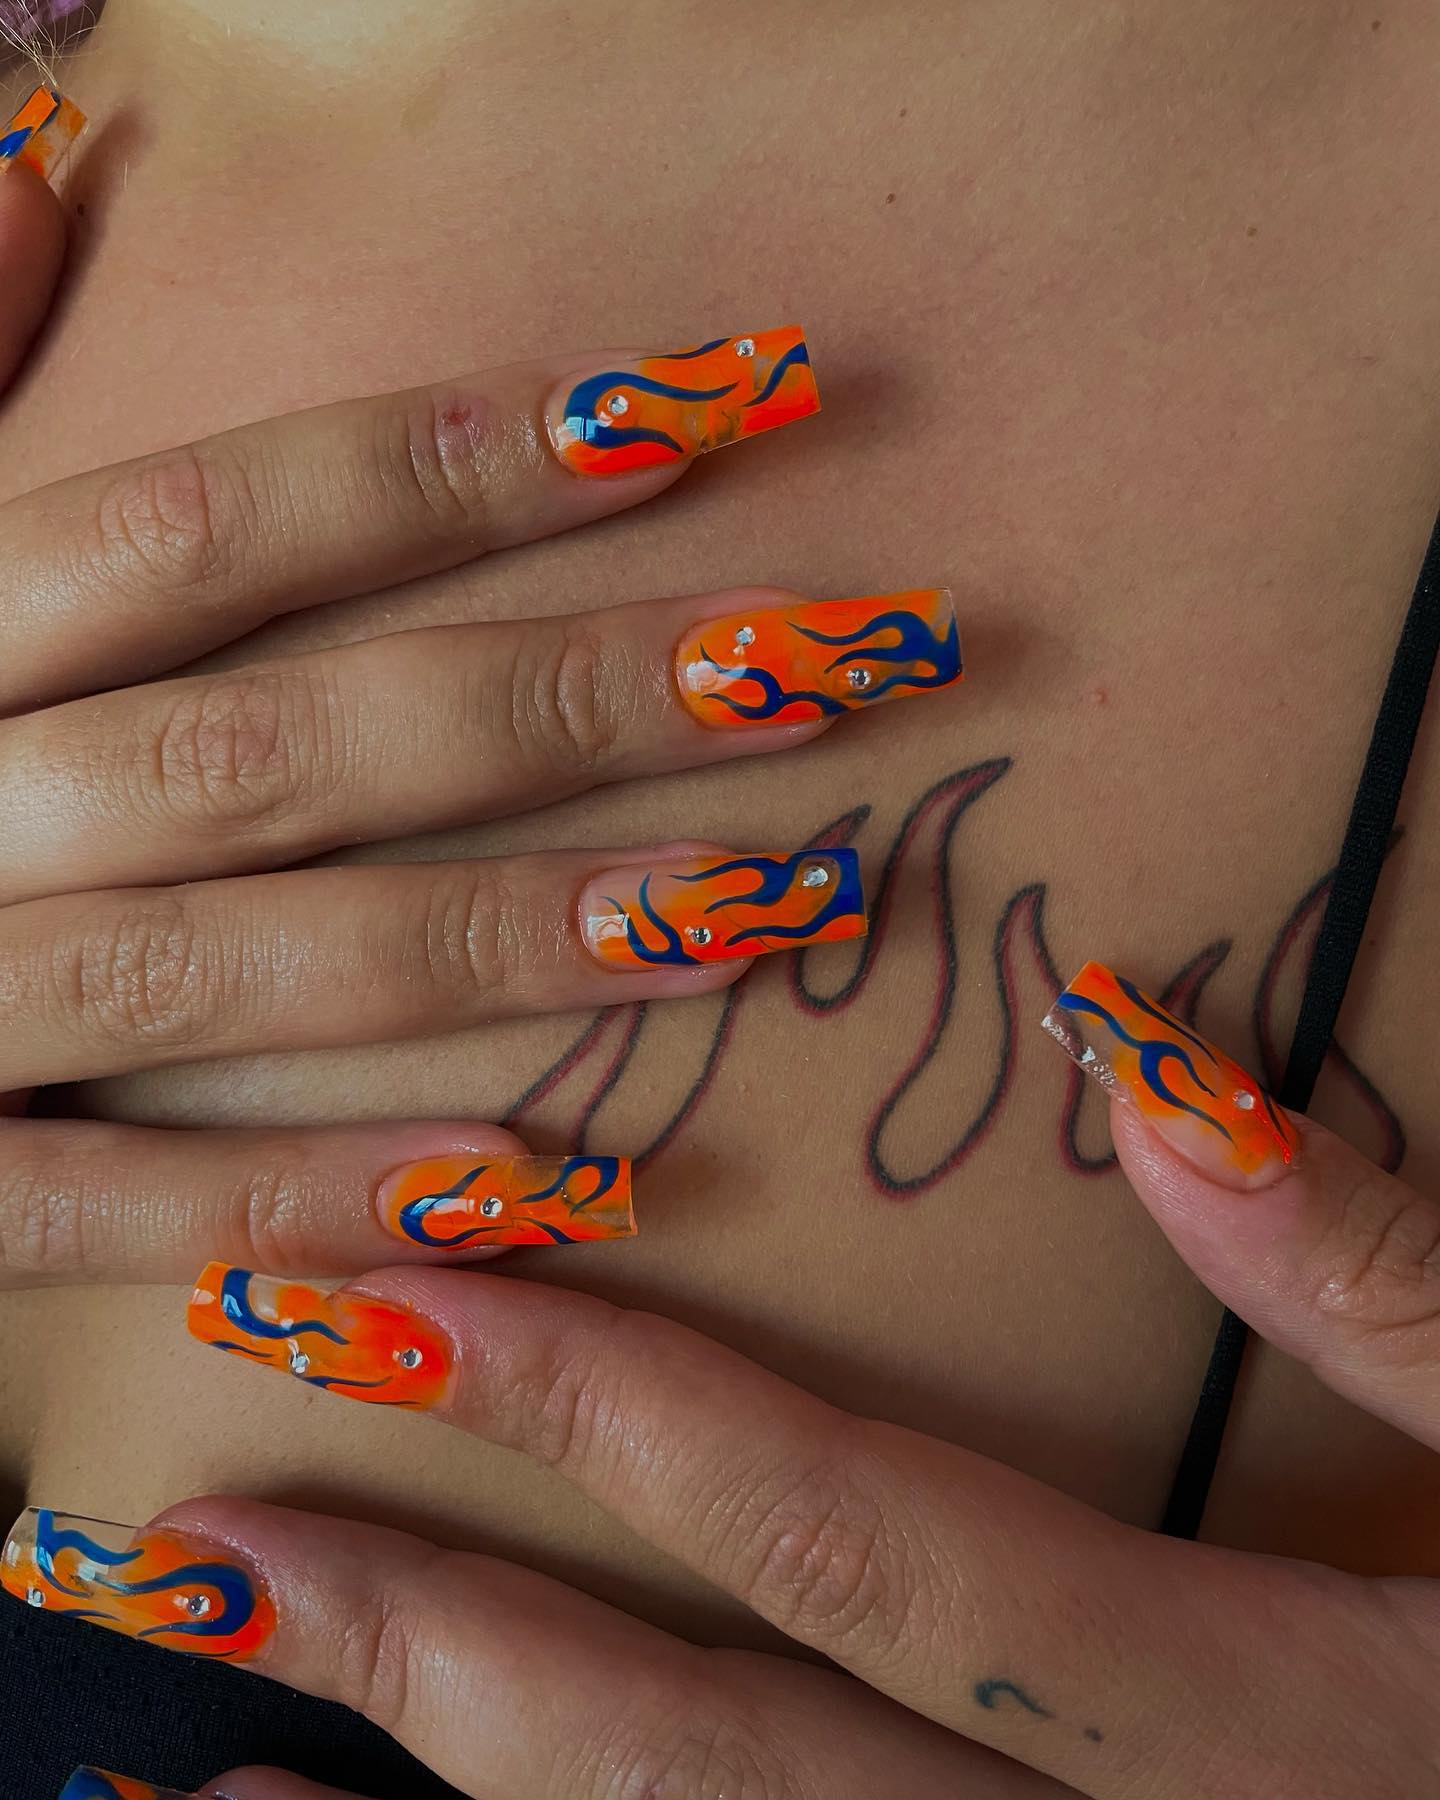 Orange and dark blue colors go well together because of their strong look. On your orange gel nails, dark blue flame-like swirls will cheer up your nails. Let's give it a shot.